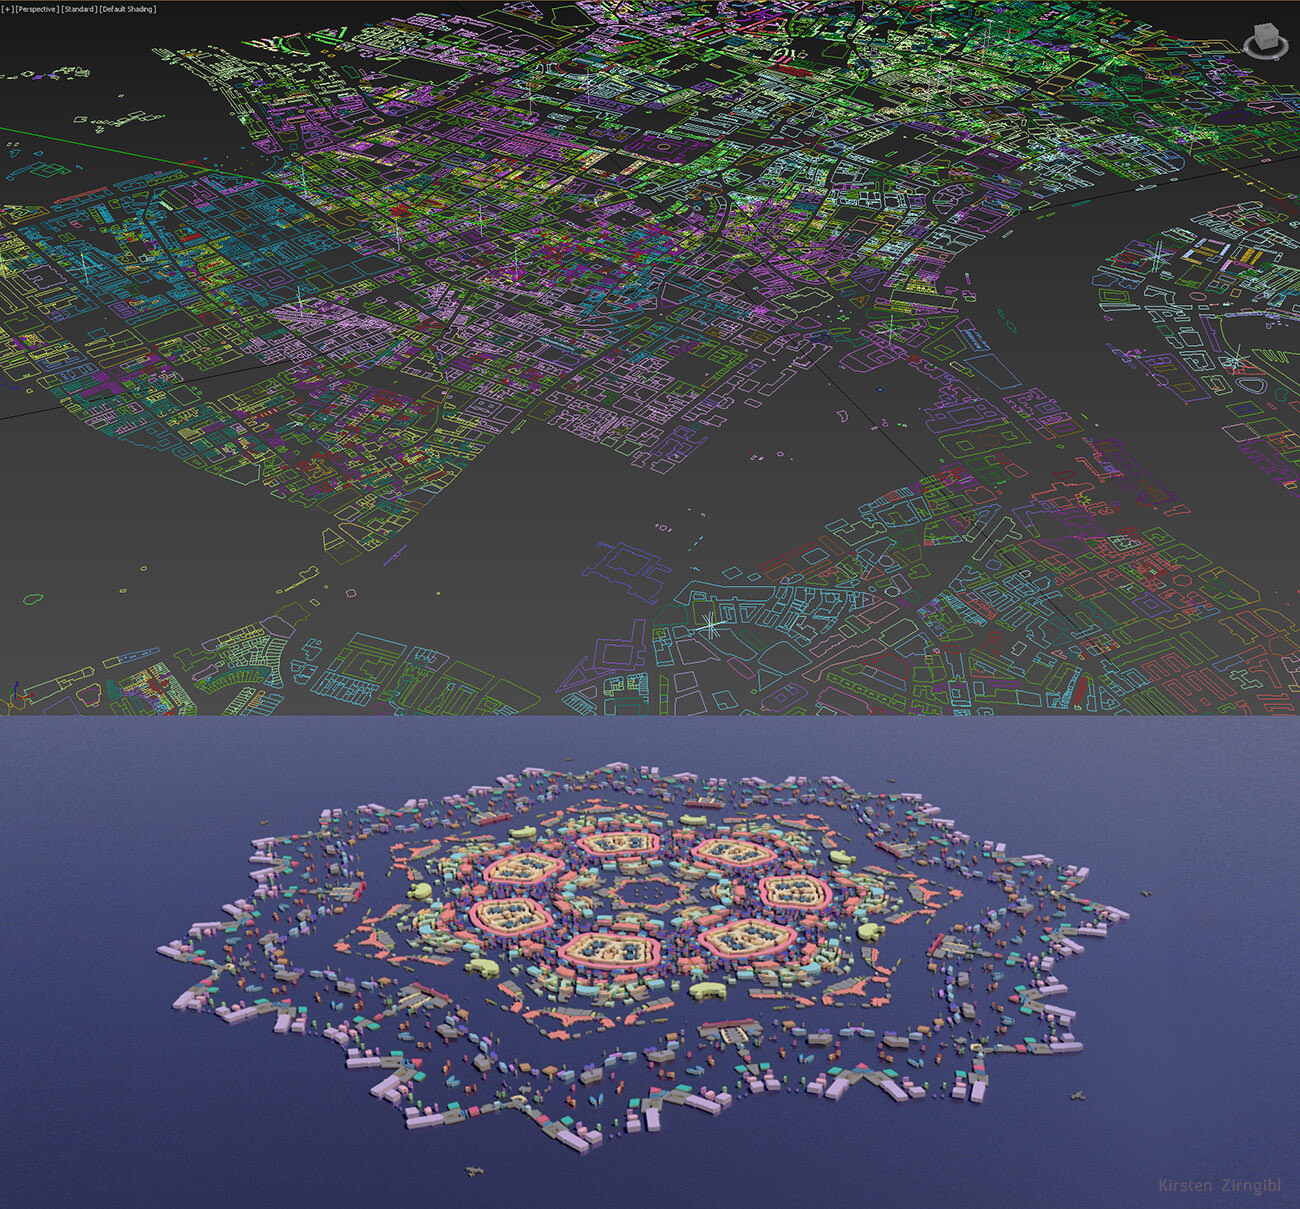 Inhaling OpenStreetMap data into 3DS Max.